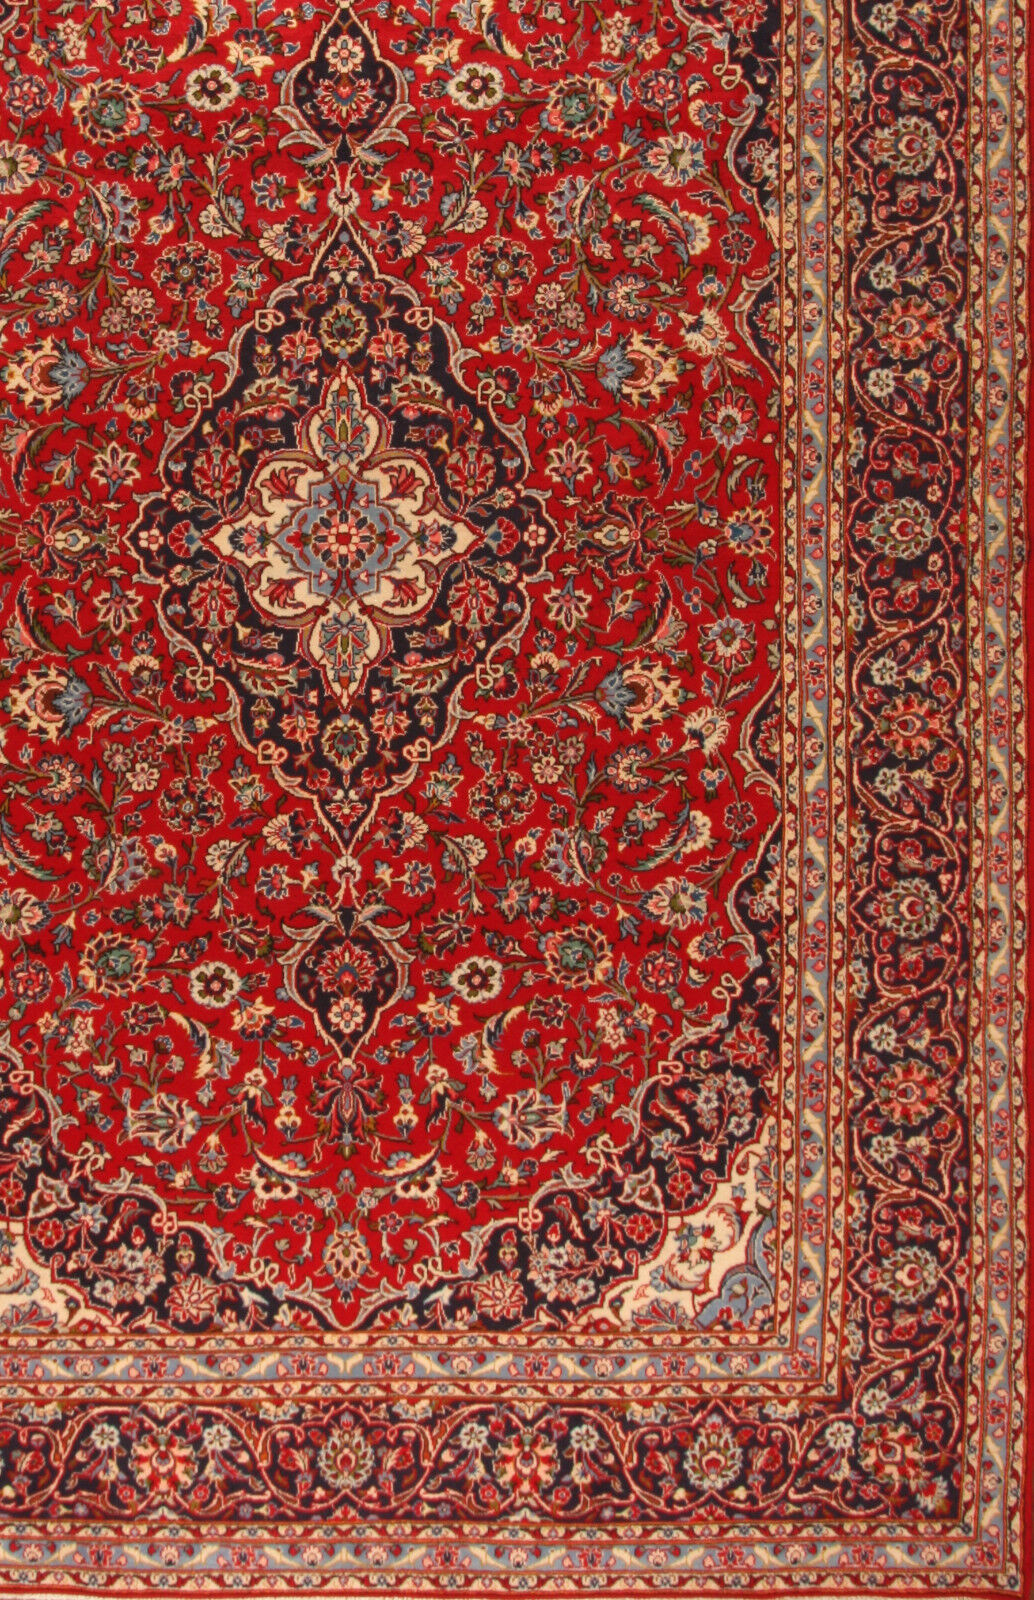 Front view of the Handmade Vintage Persian Style Kashan Rug highlighting design elements